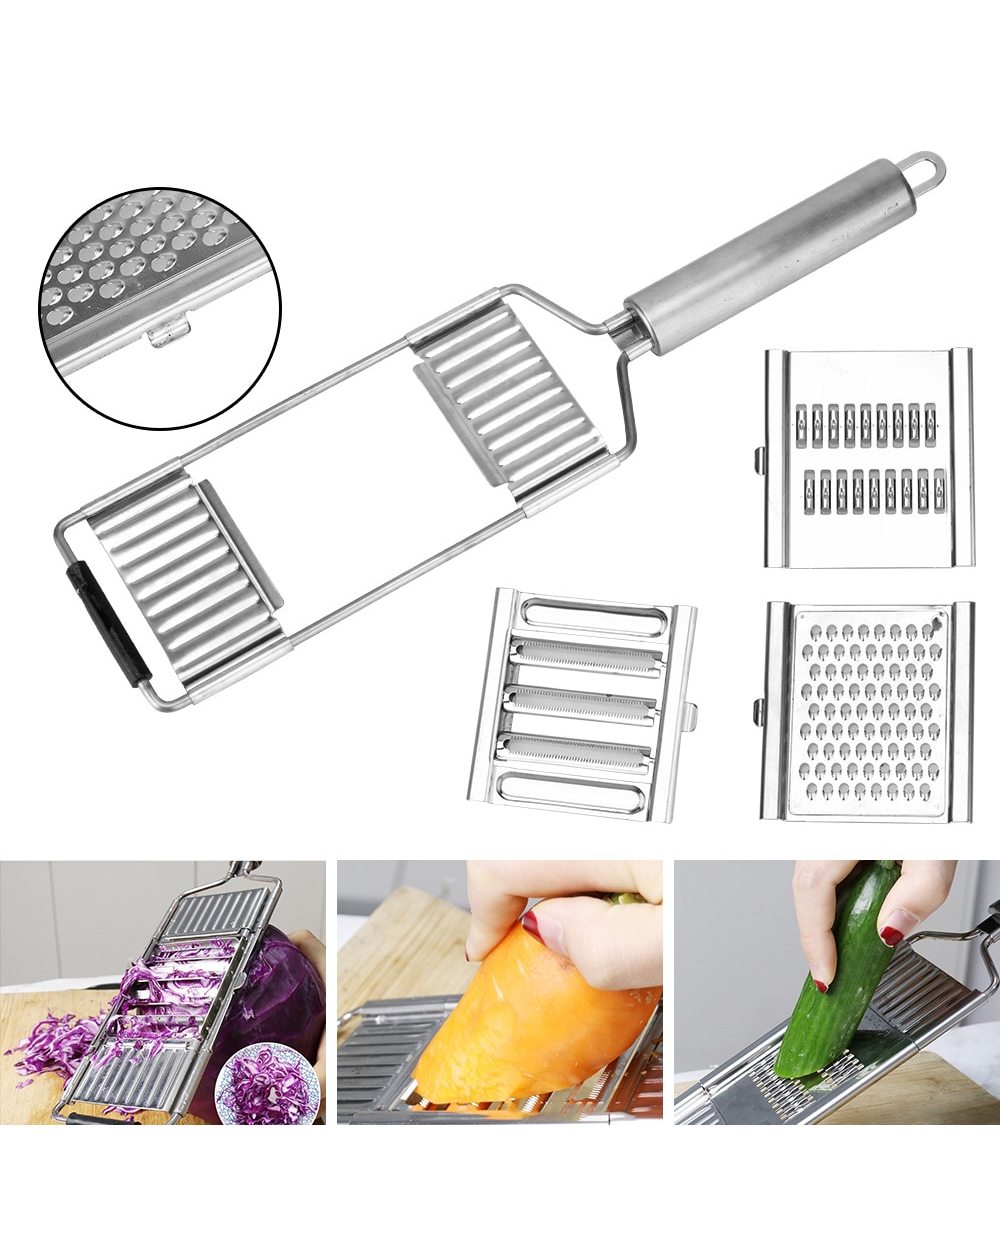 🔥Last Day Promotion 48% OFF🔥3 In 1 Multifunctional Grater Make Your Cooking More Efficient